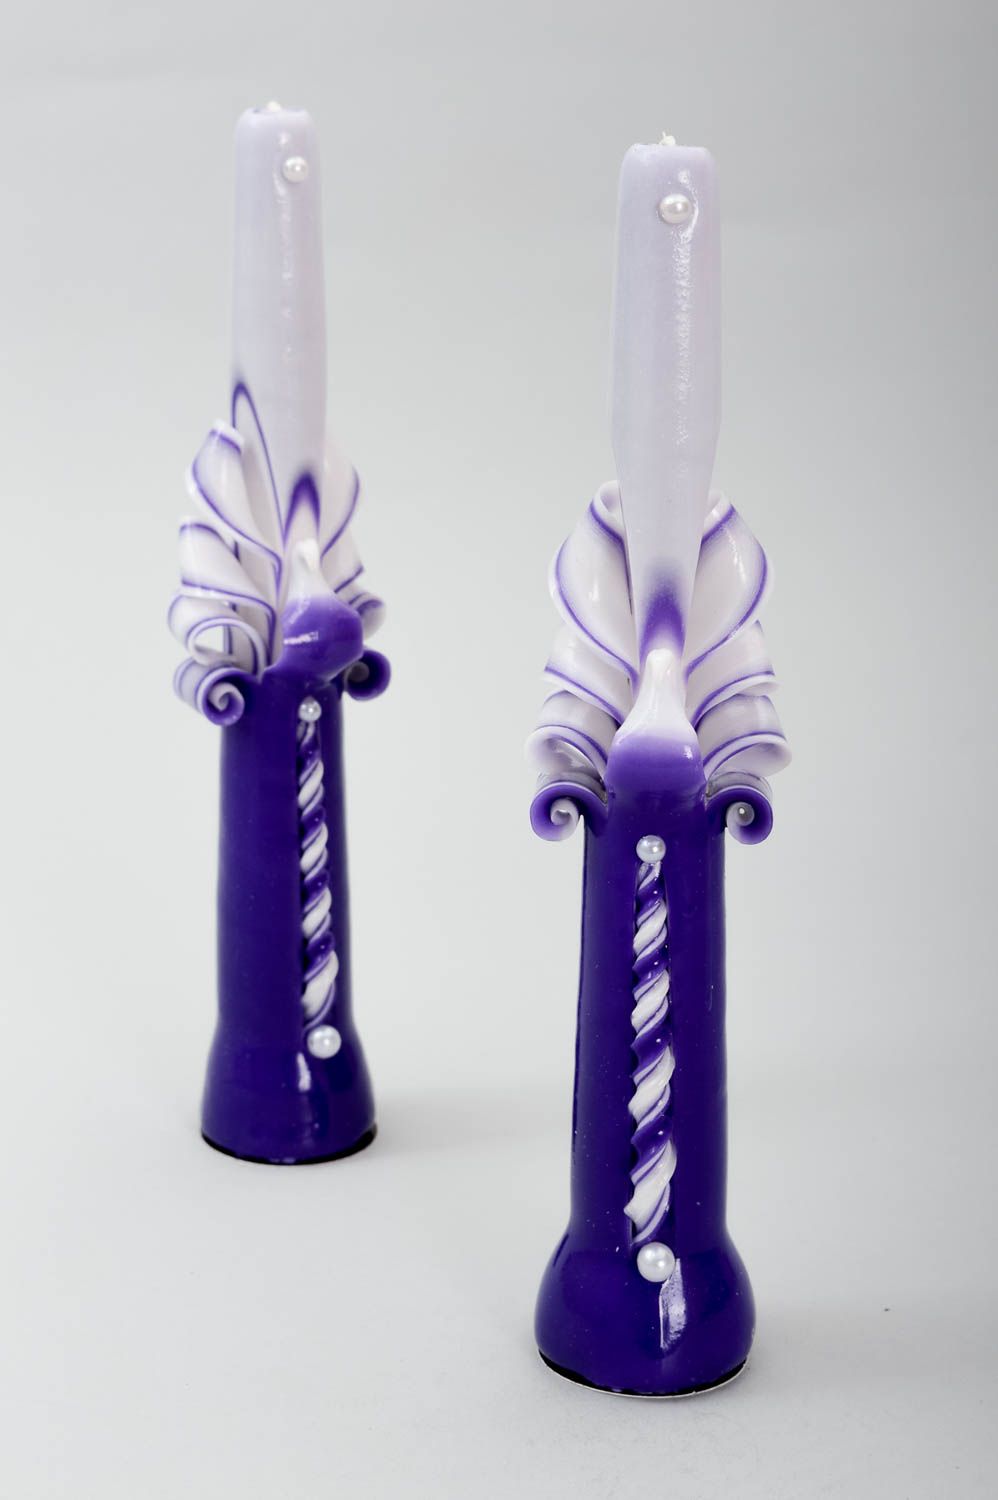 Handmade wedding candles 2 carved unusual candles cute stylish decoration photo 2